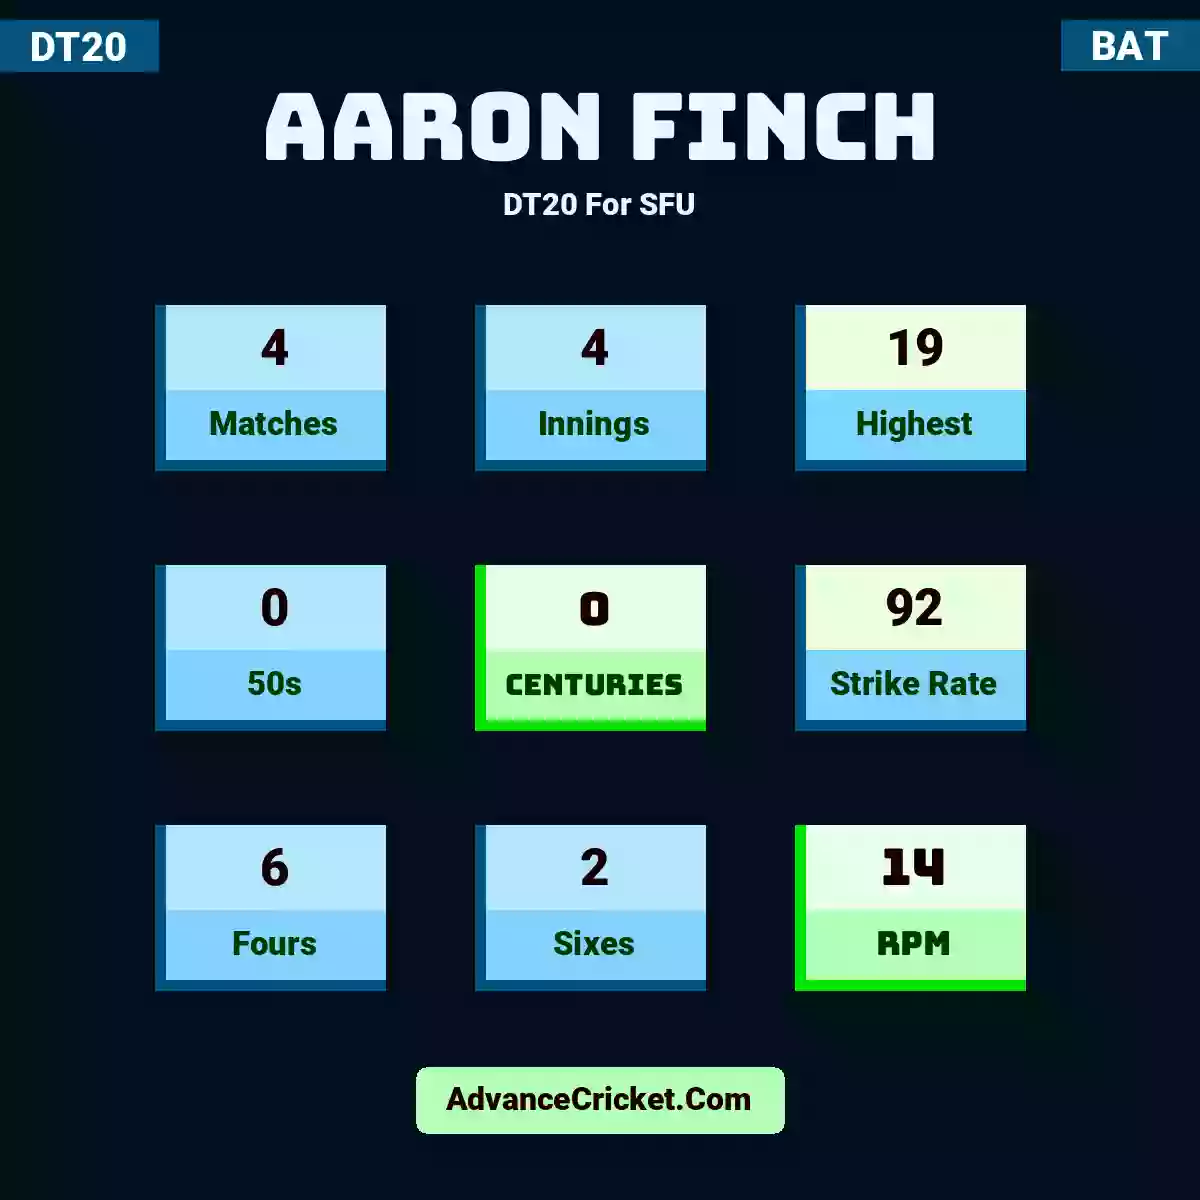 Aaron Finch DT20  For SFU, Aaron Finch played 4 matches, scored 19 runs as highest, 0 half-centuries, and 0 centuries, with a strike rate of 92. A.Finch hit 6 fours and 2 sixes, with an RPM of 14.